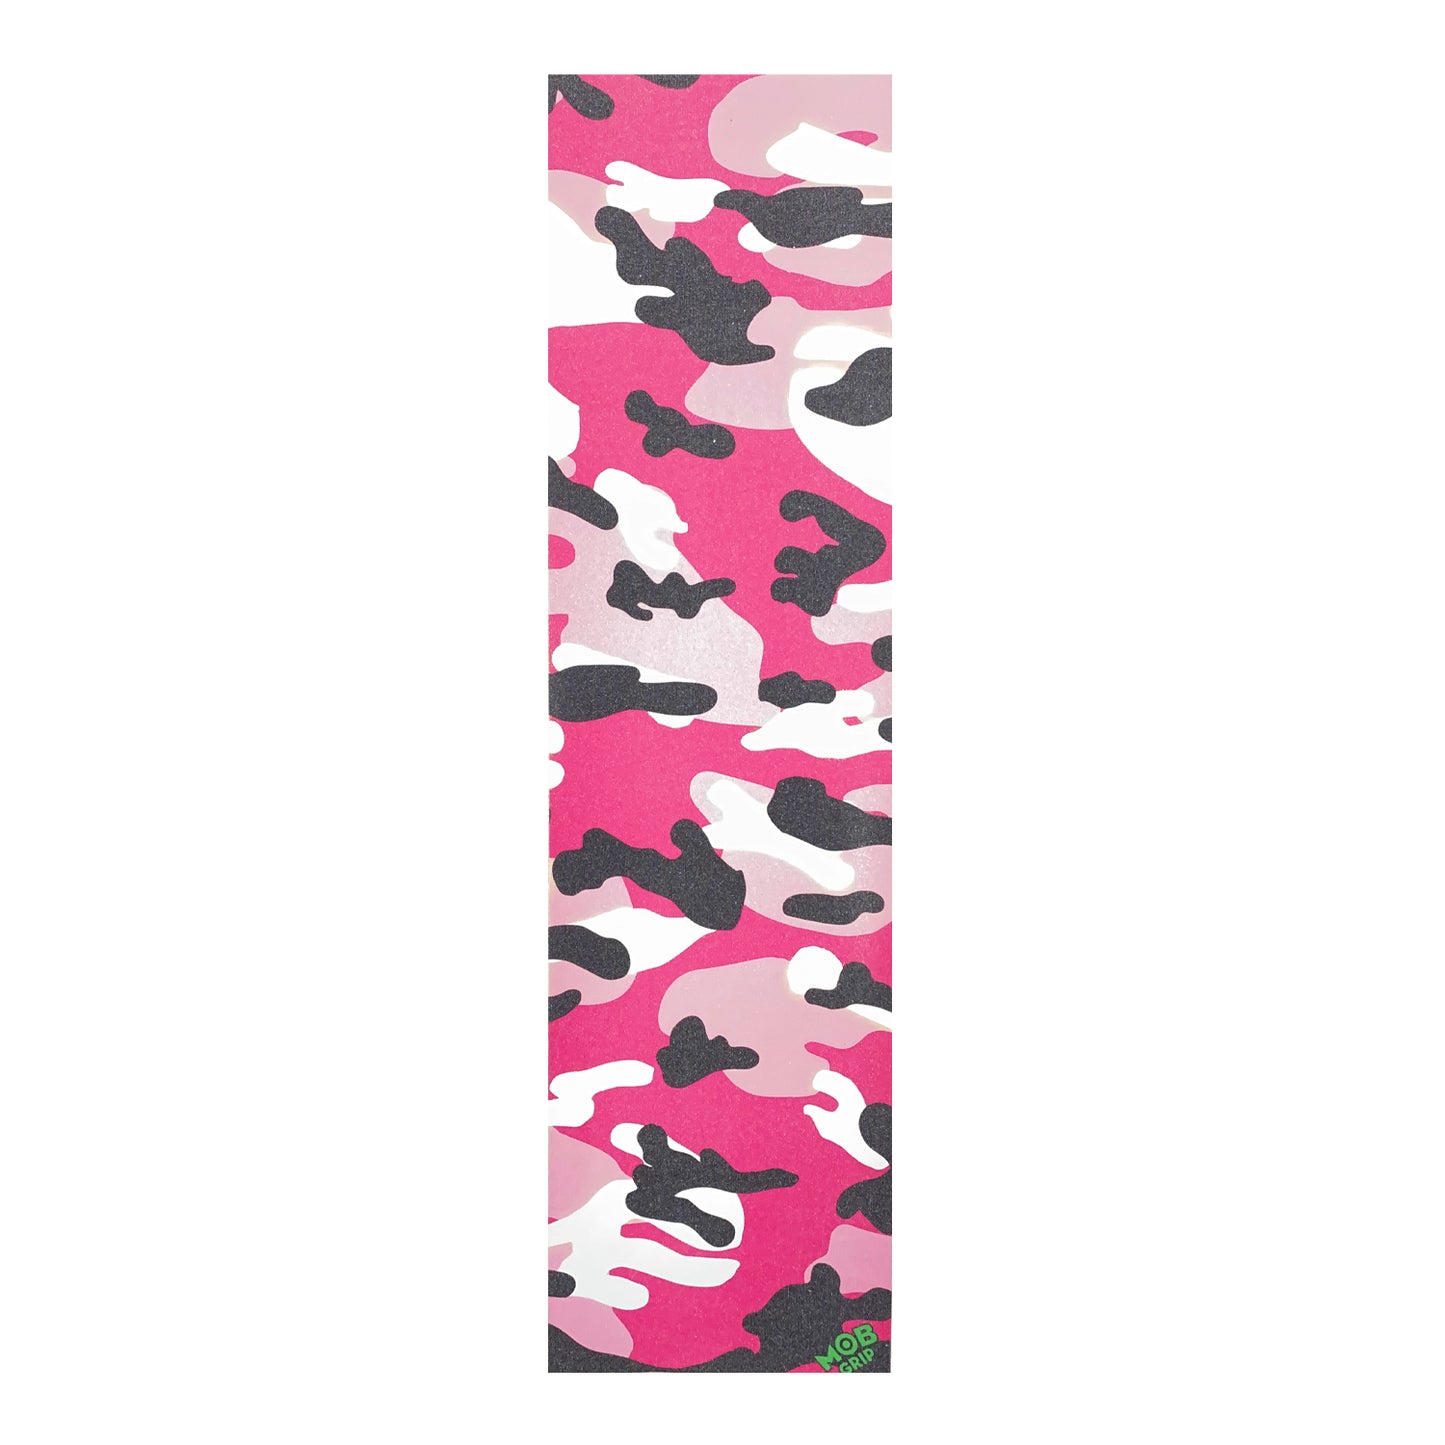 Mob 33 x 9" Graphic Grip Camo - Pink - Prime Delux Store